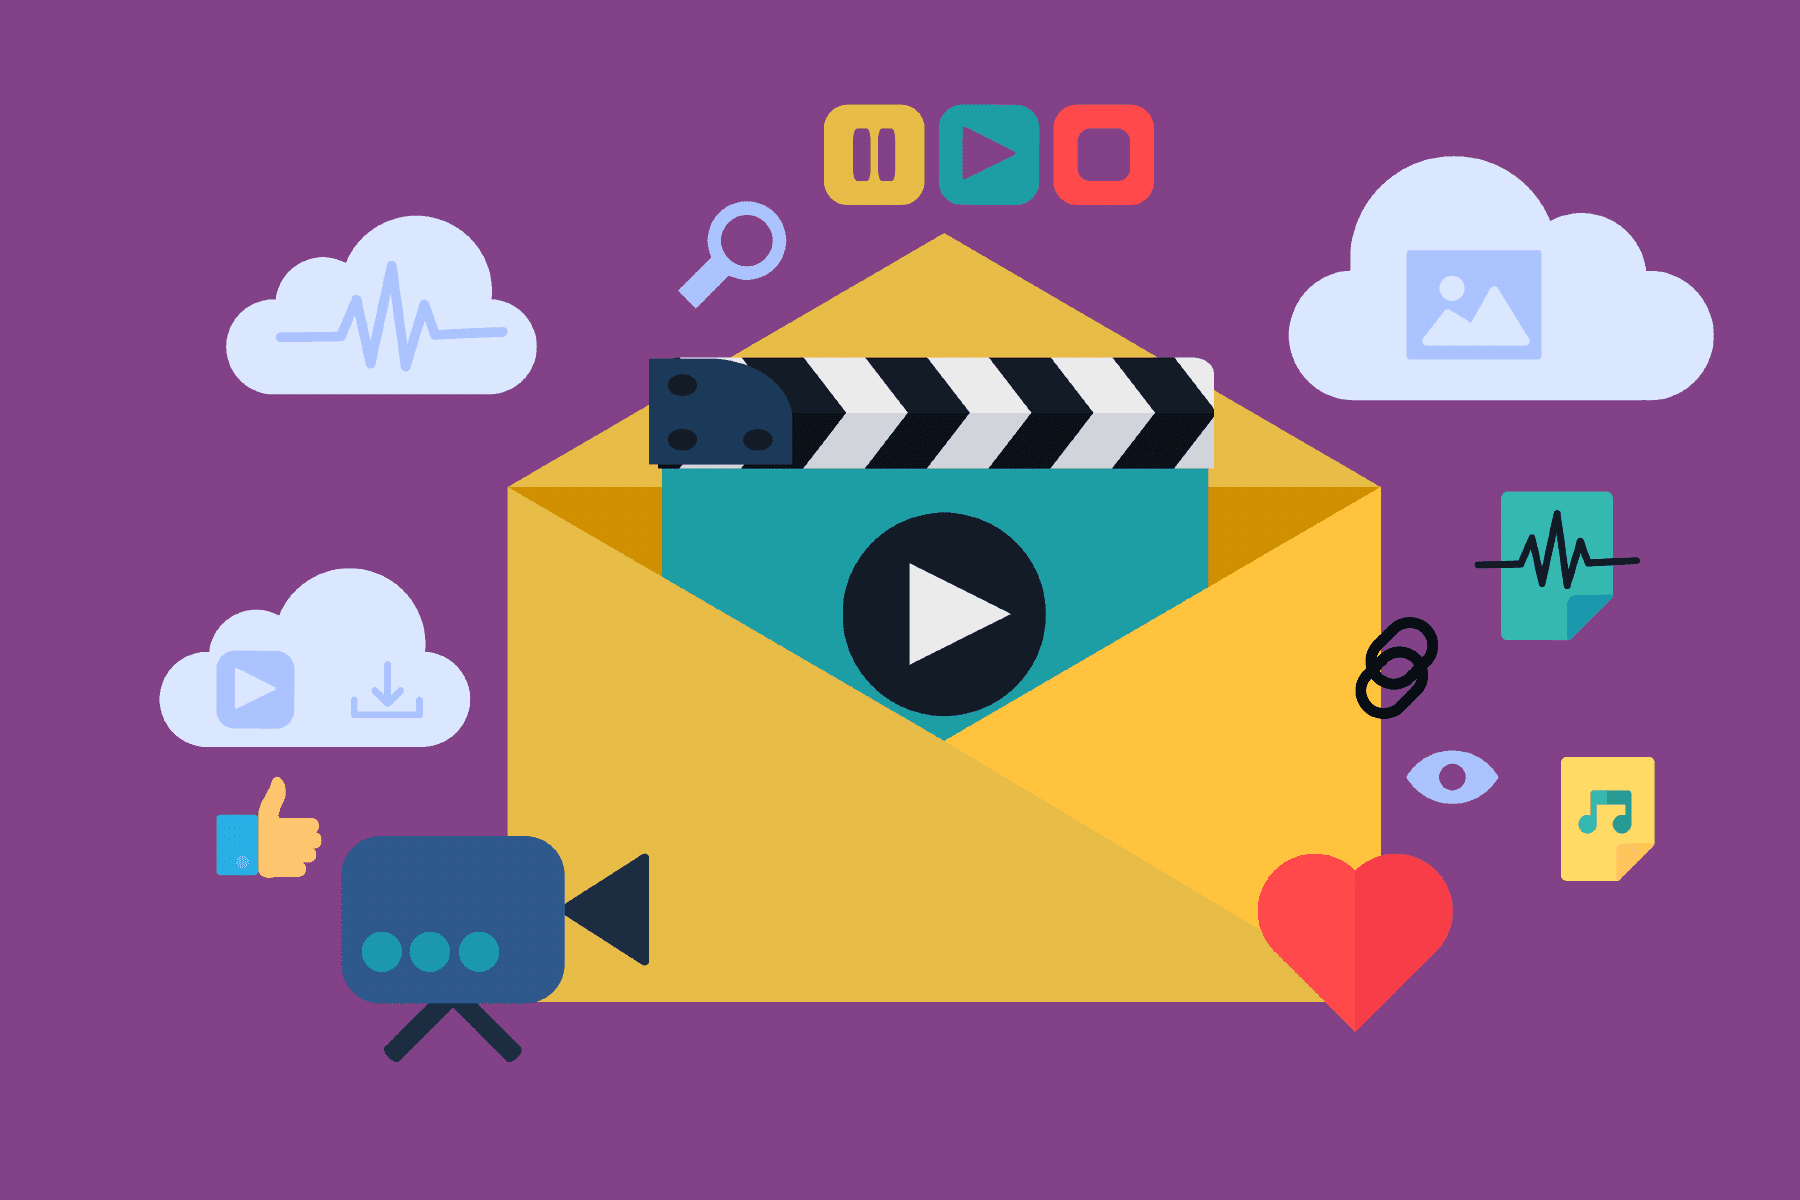 Learn how to send a video via email